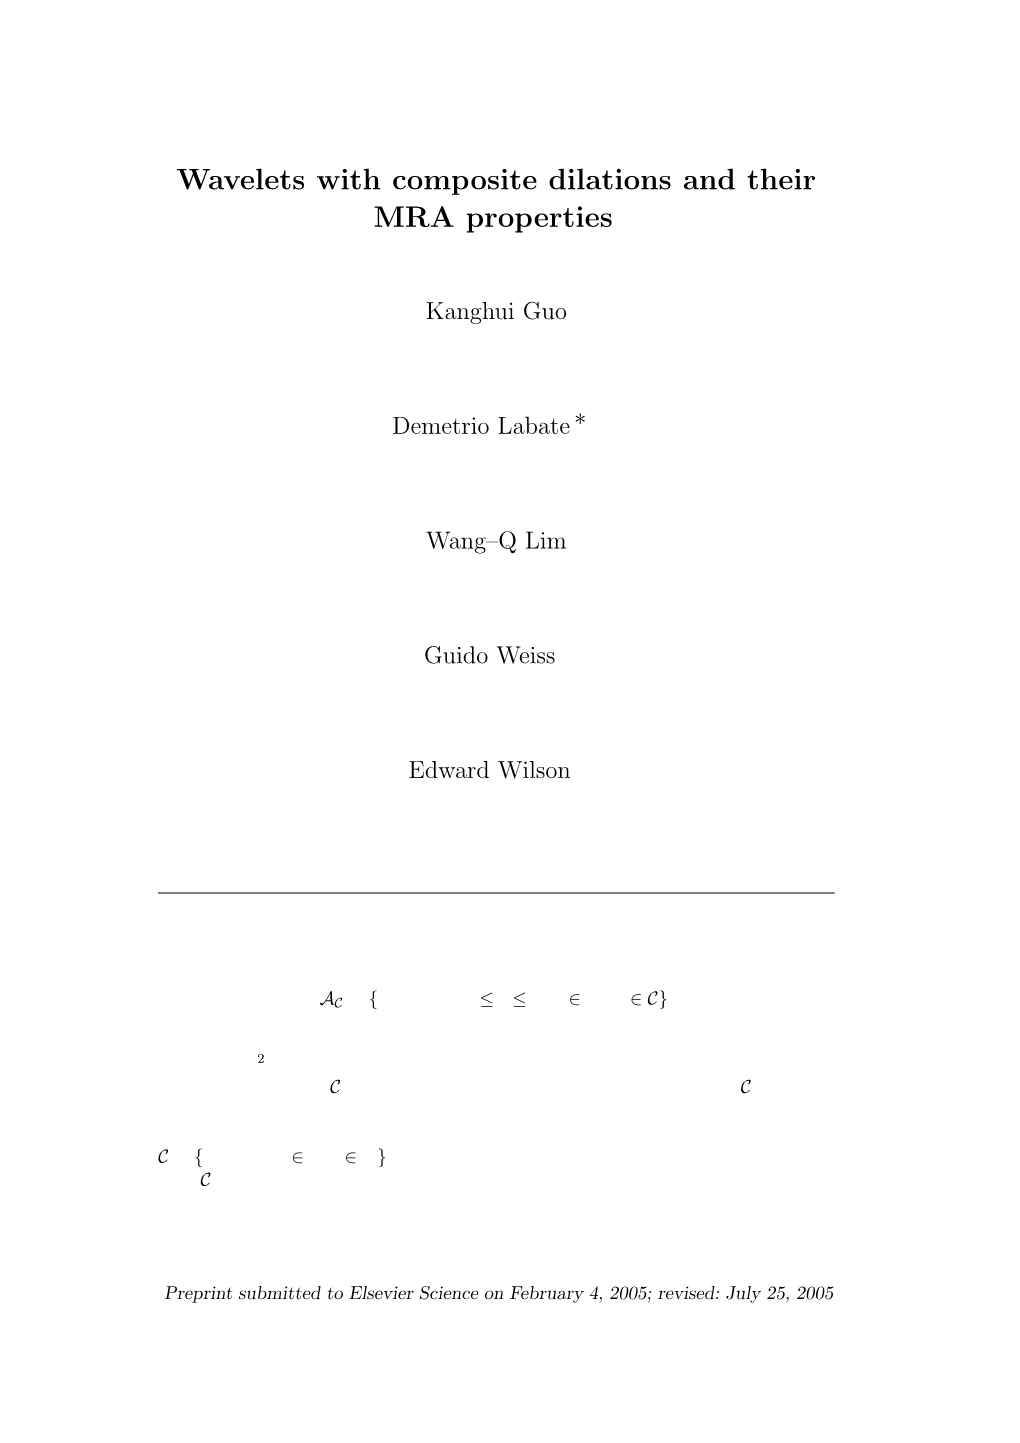 Wavelets with Composite Dilations and Their MRA Properties